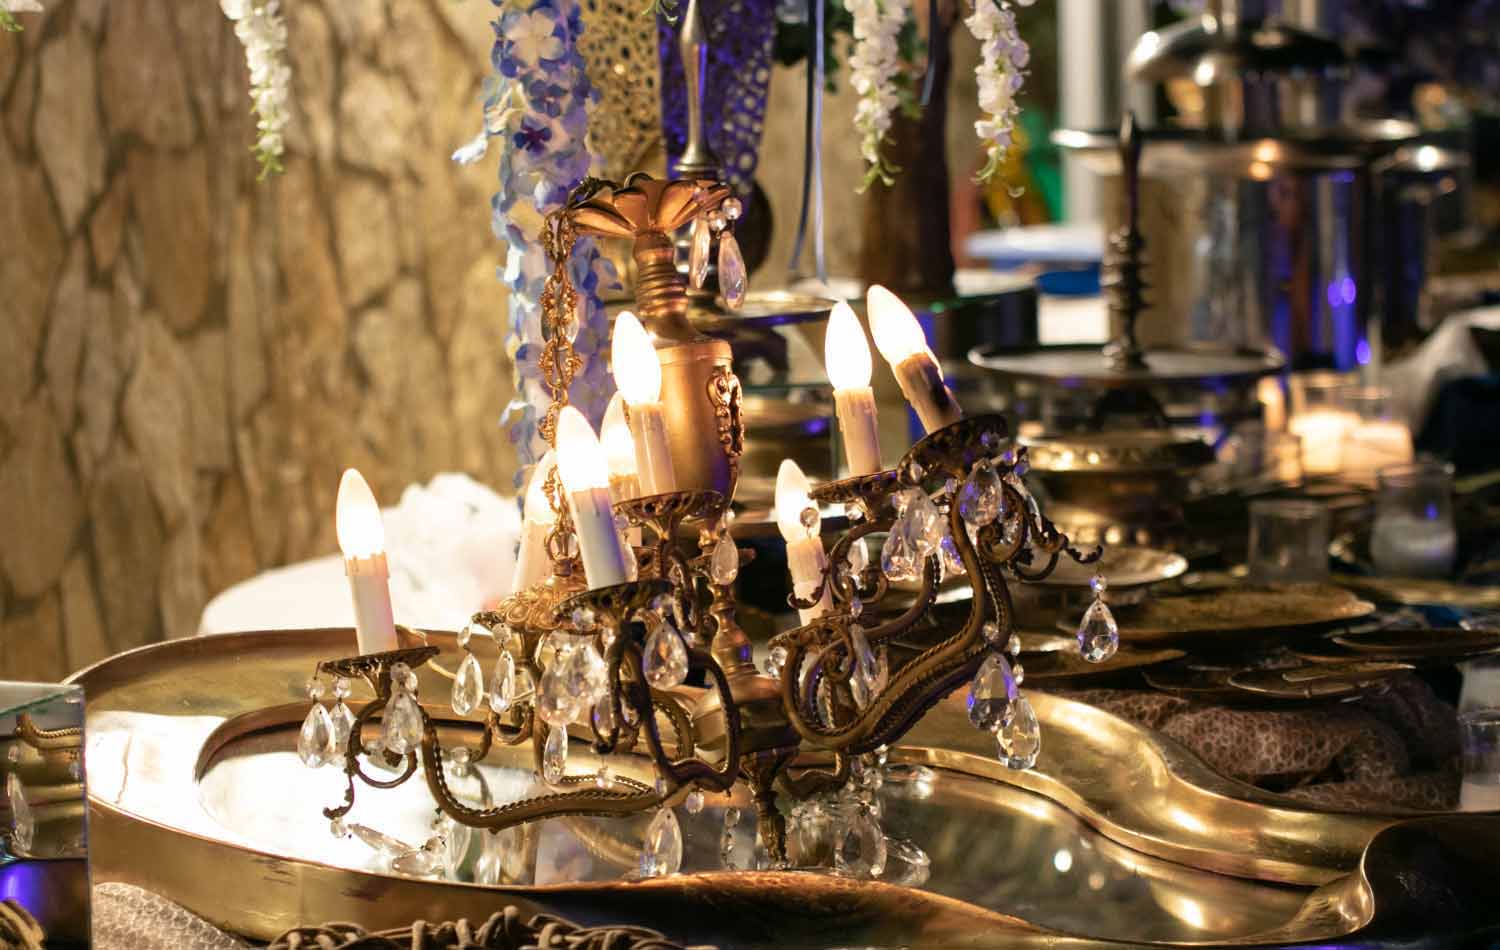 A rustic golden candelier alternatively added as a decorative element on the buffet by Diamond Events